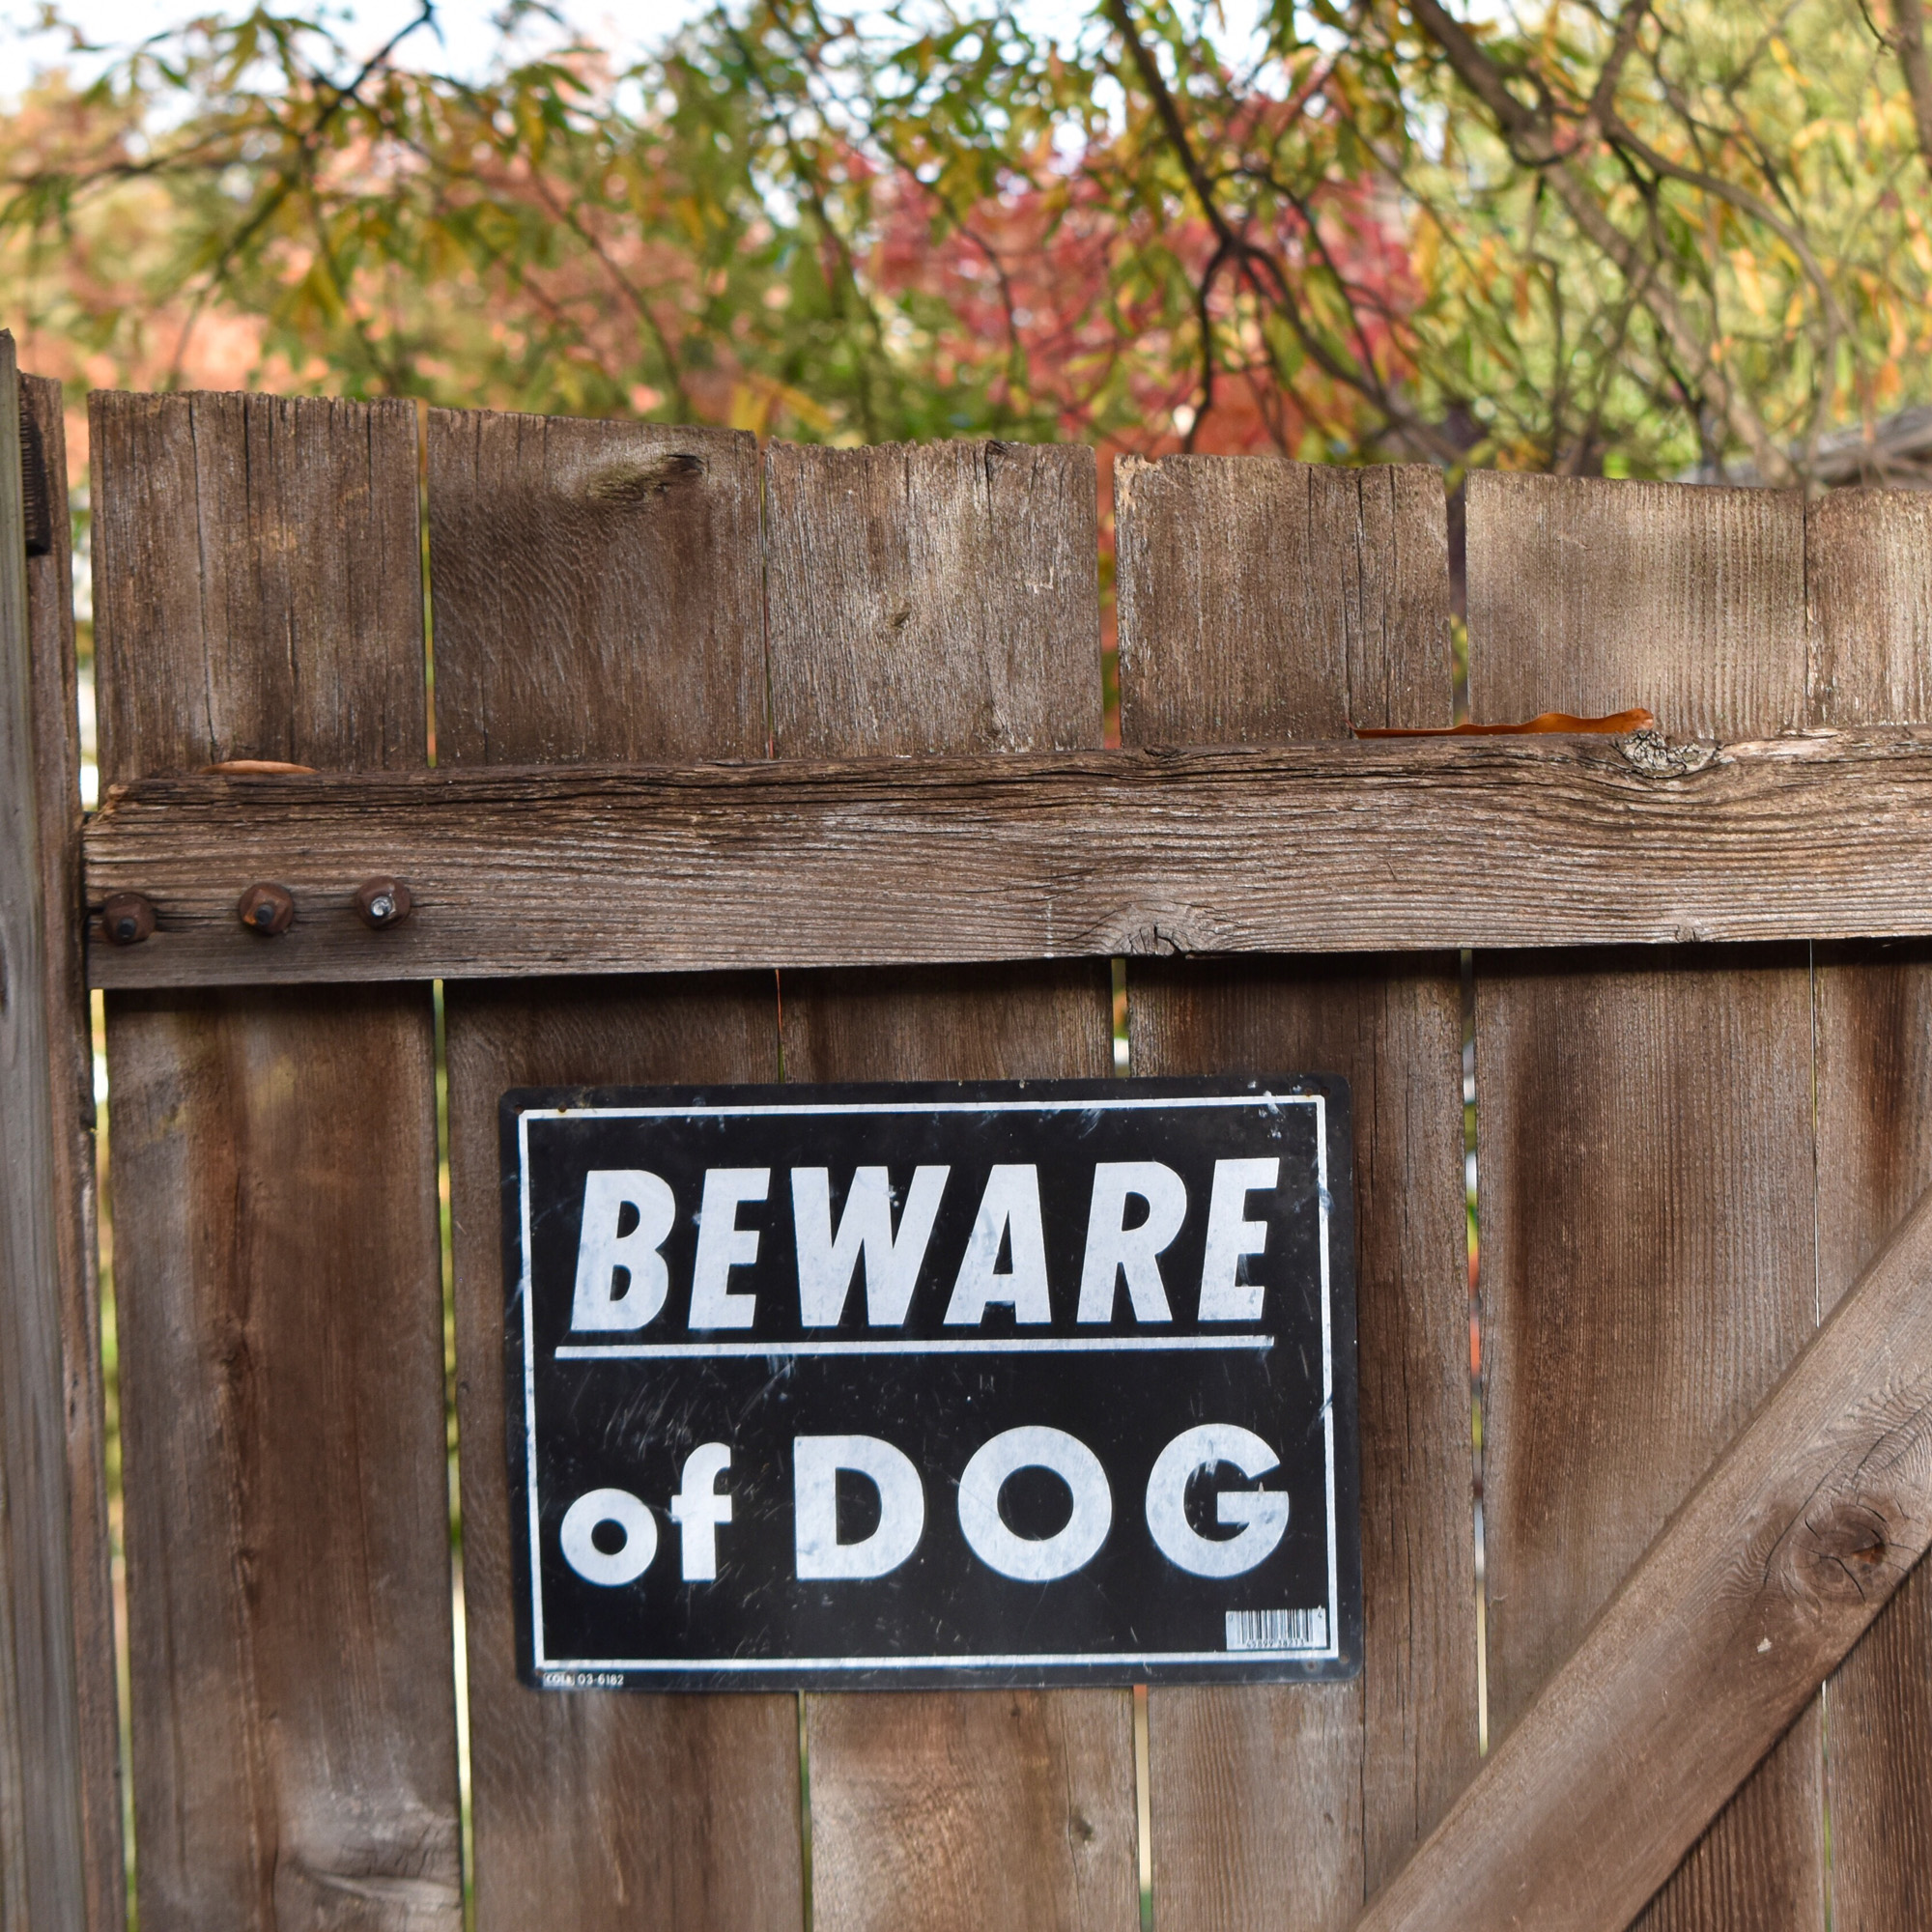 Beware of dog sign on fence